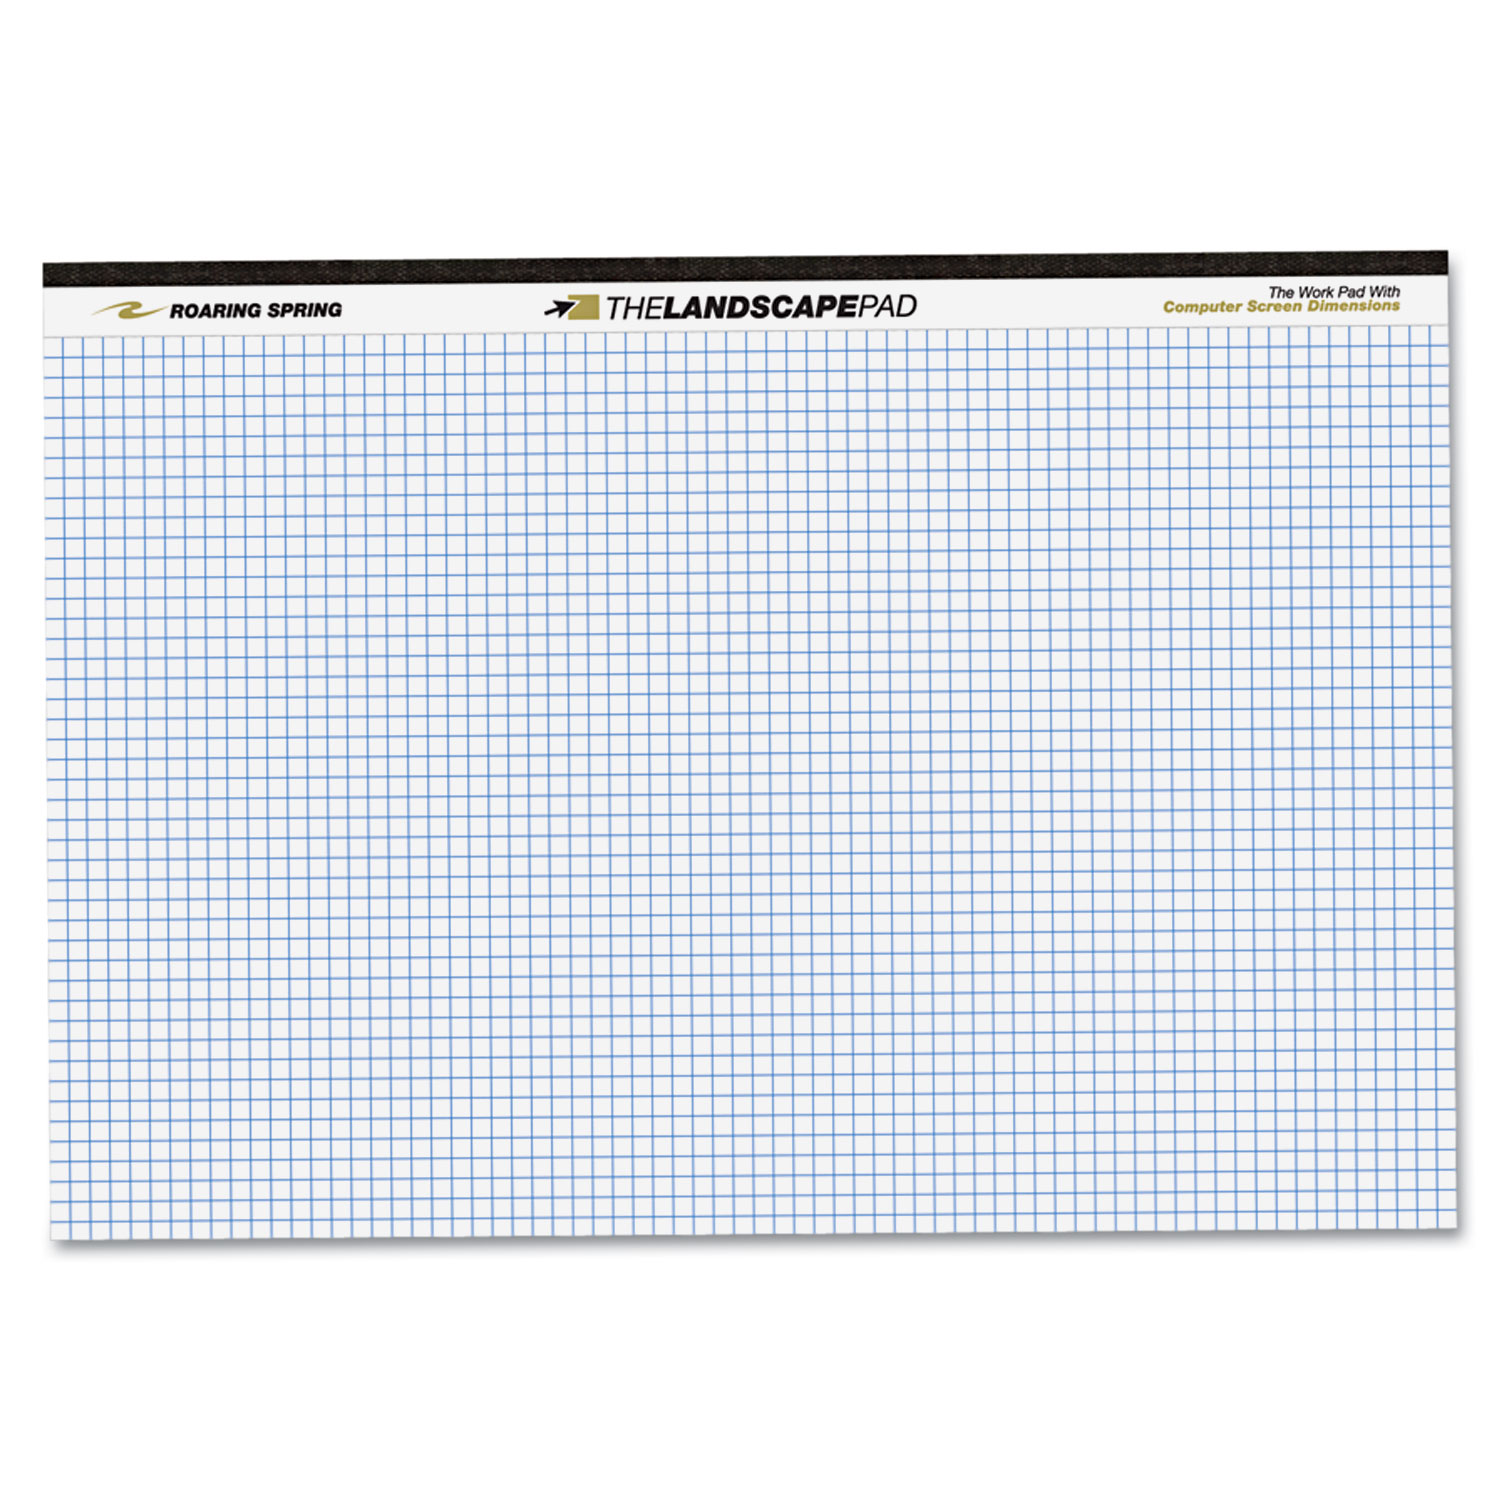 WIDE Landscape Format Quadrille Writing Pad, 11 x 9 1/2, White, 40 Sheets